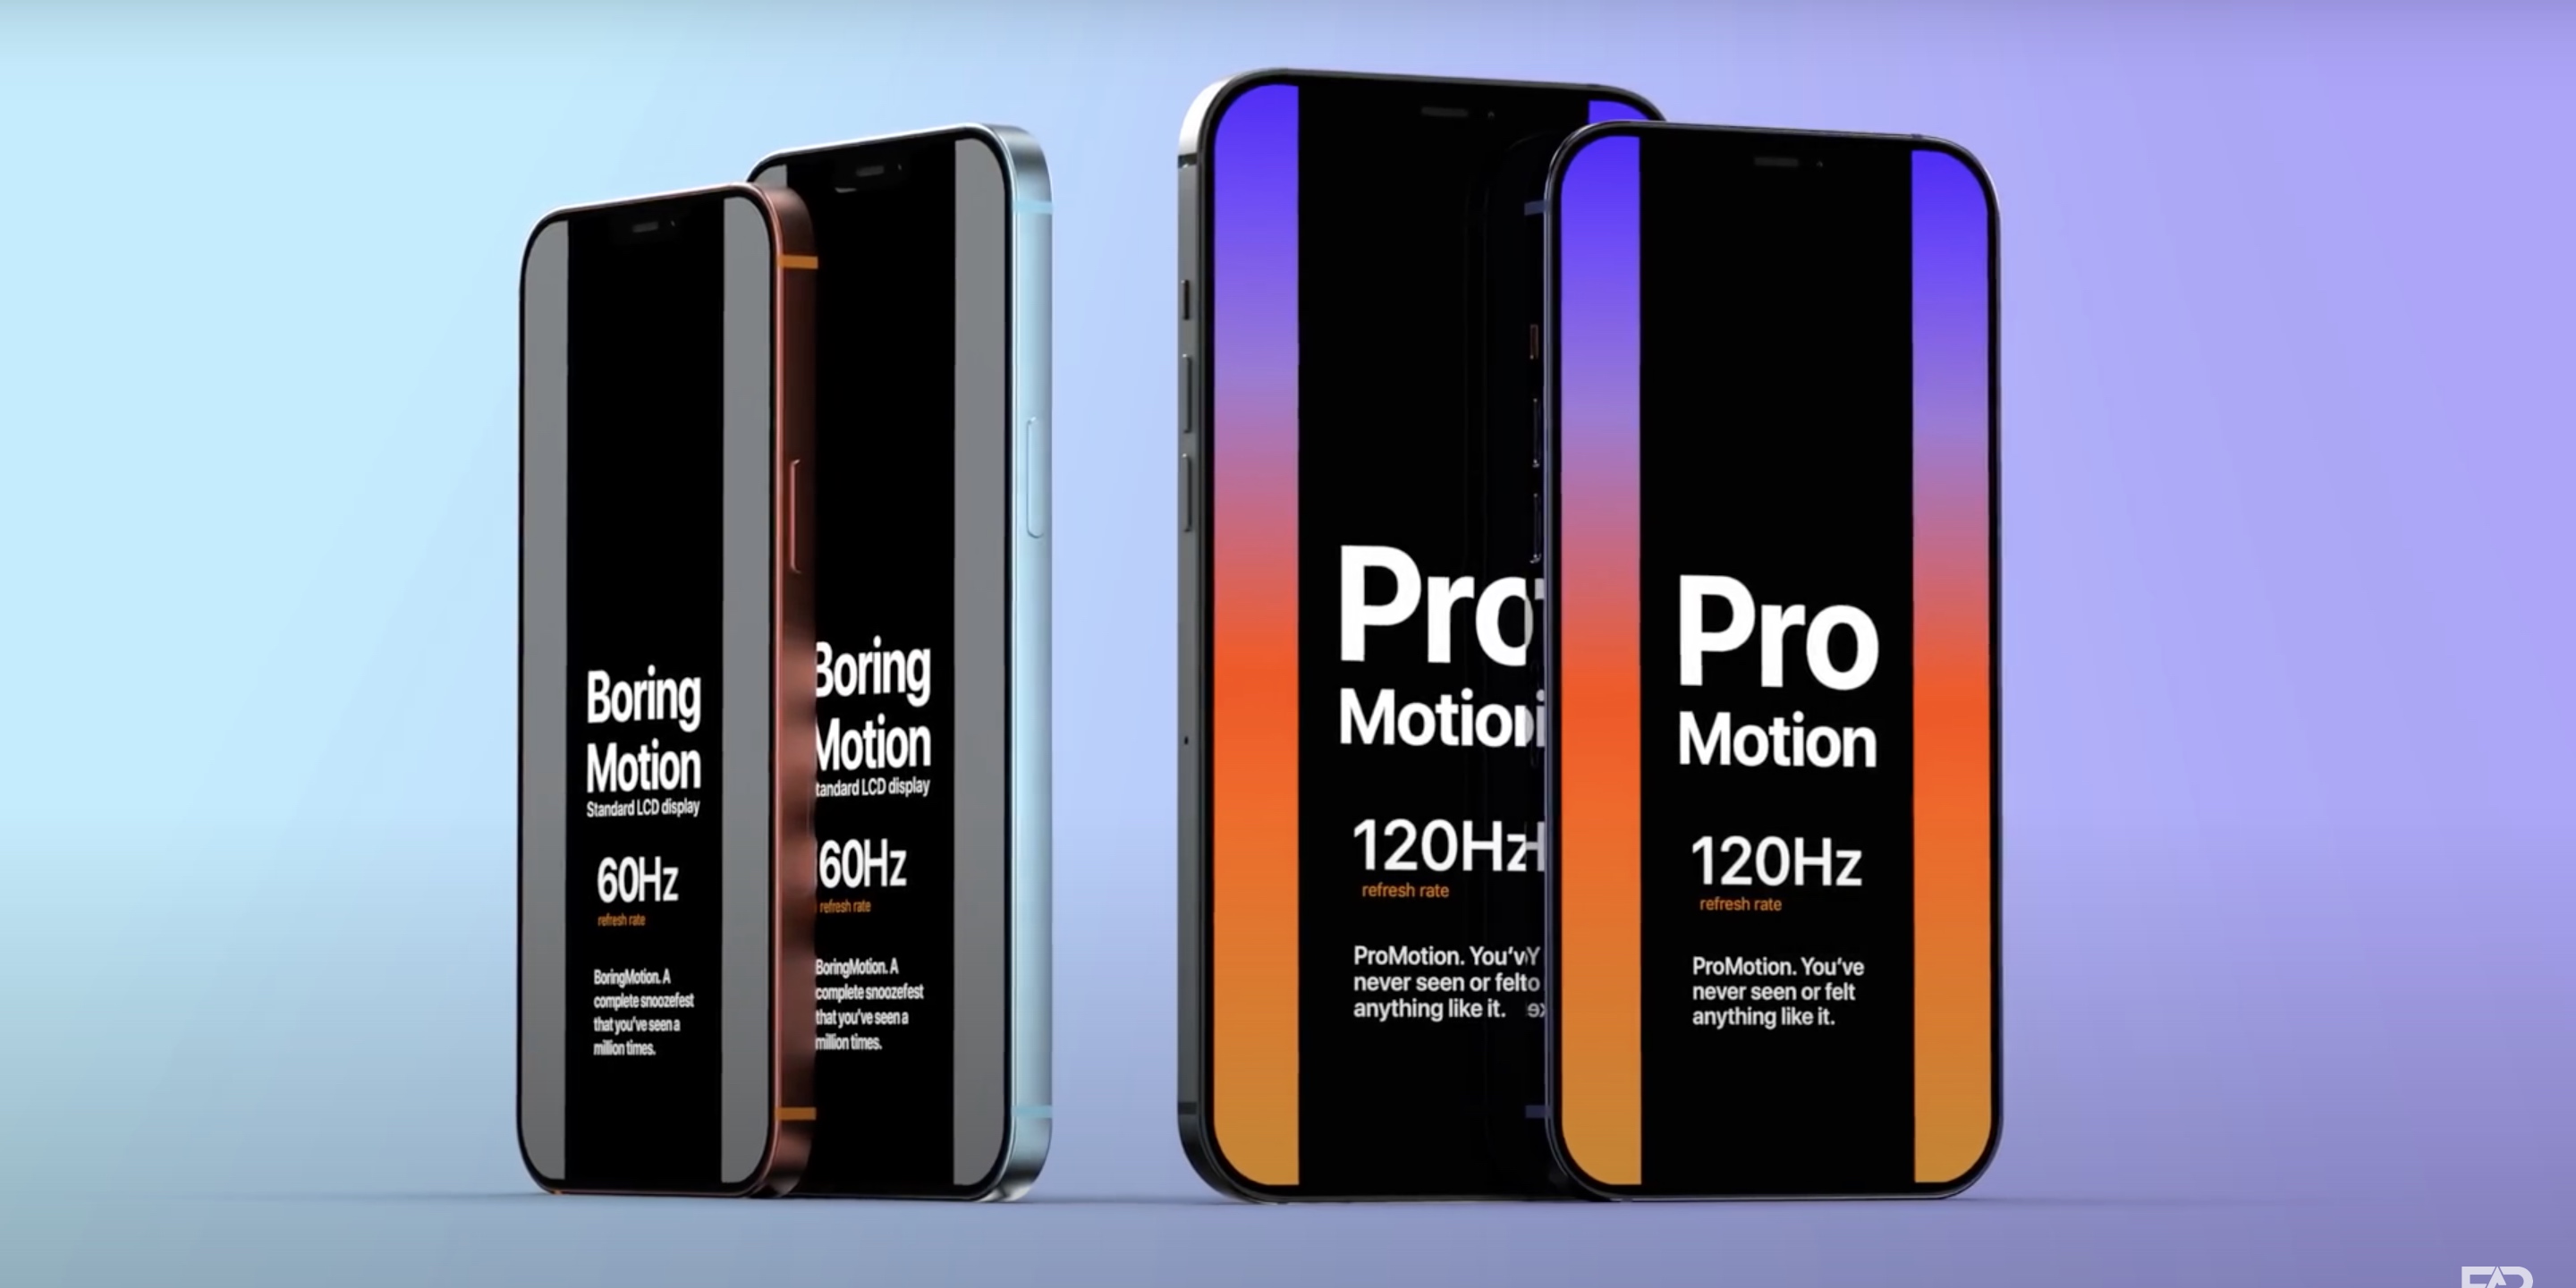 Rumors Iphone 12 Pro To Feature Promotion High Refresh Rate